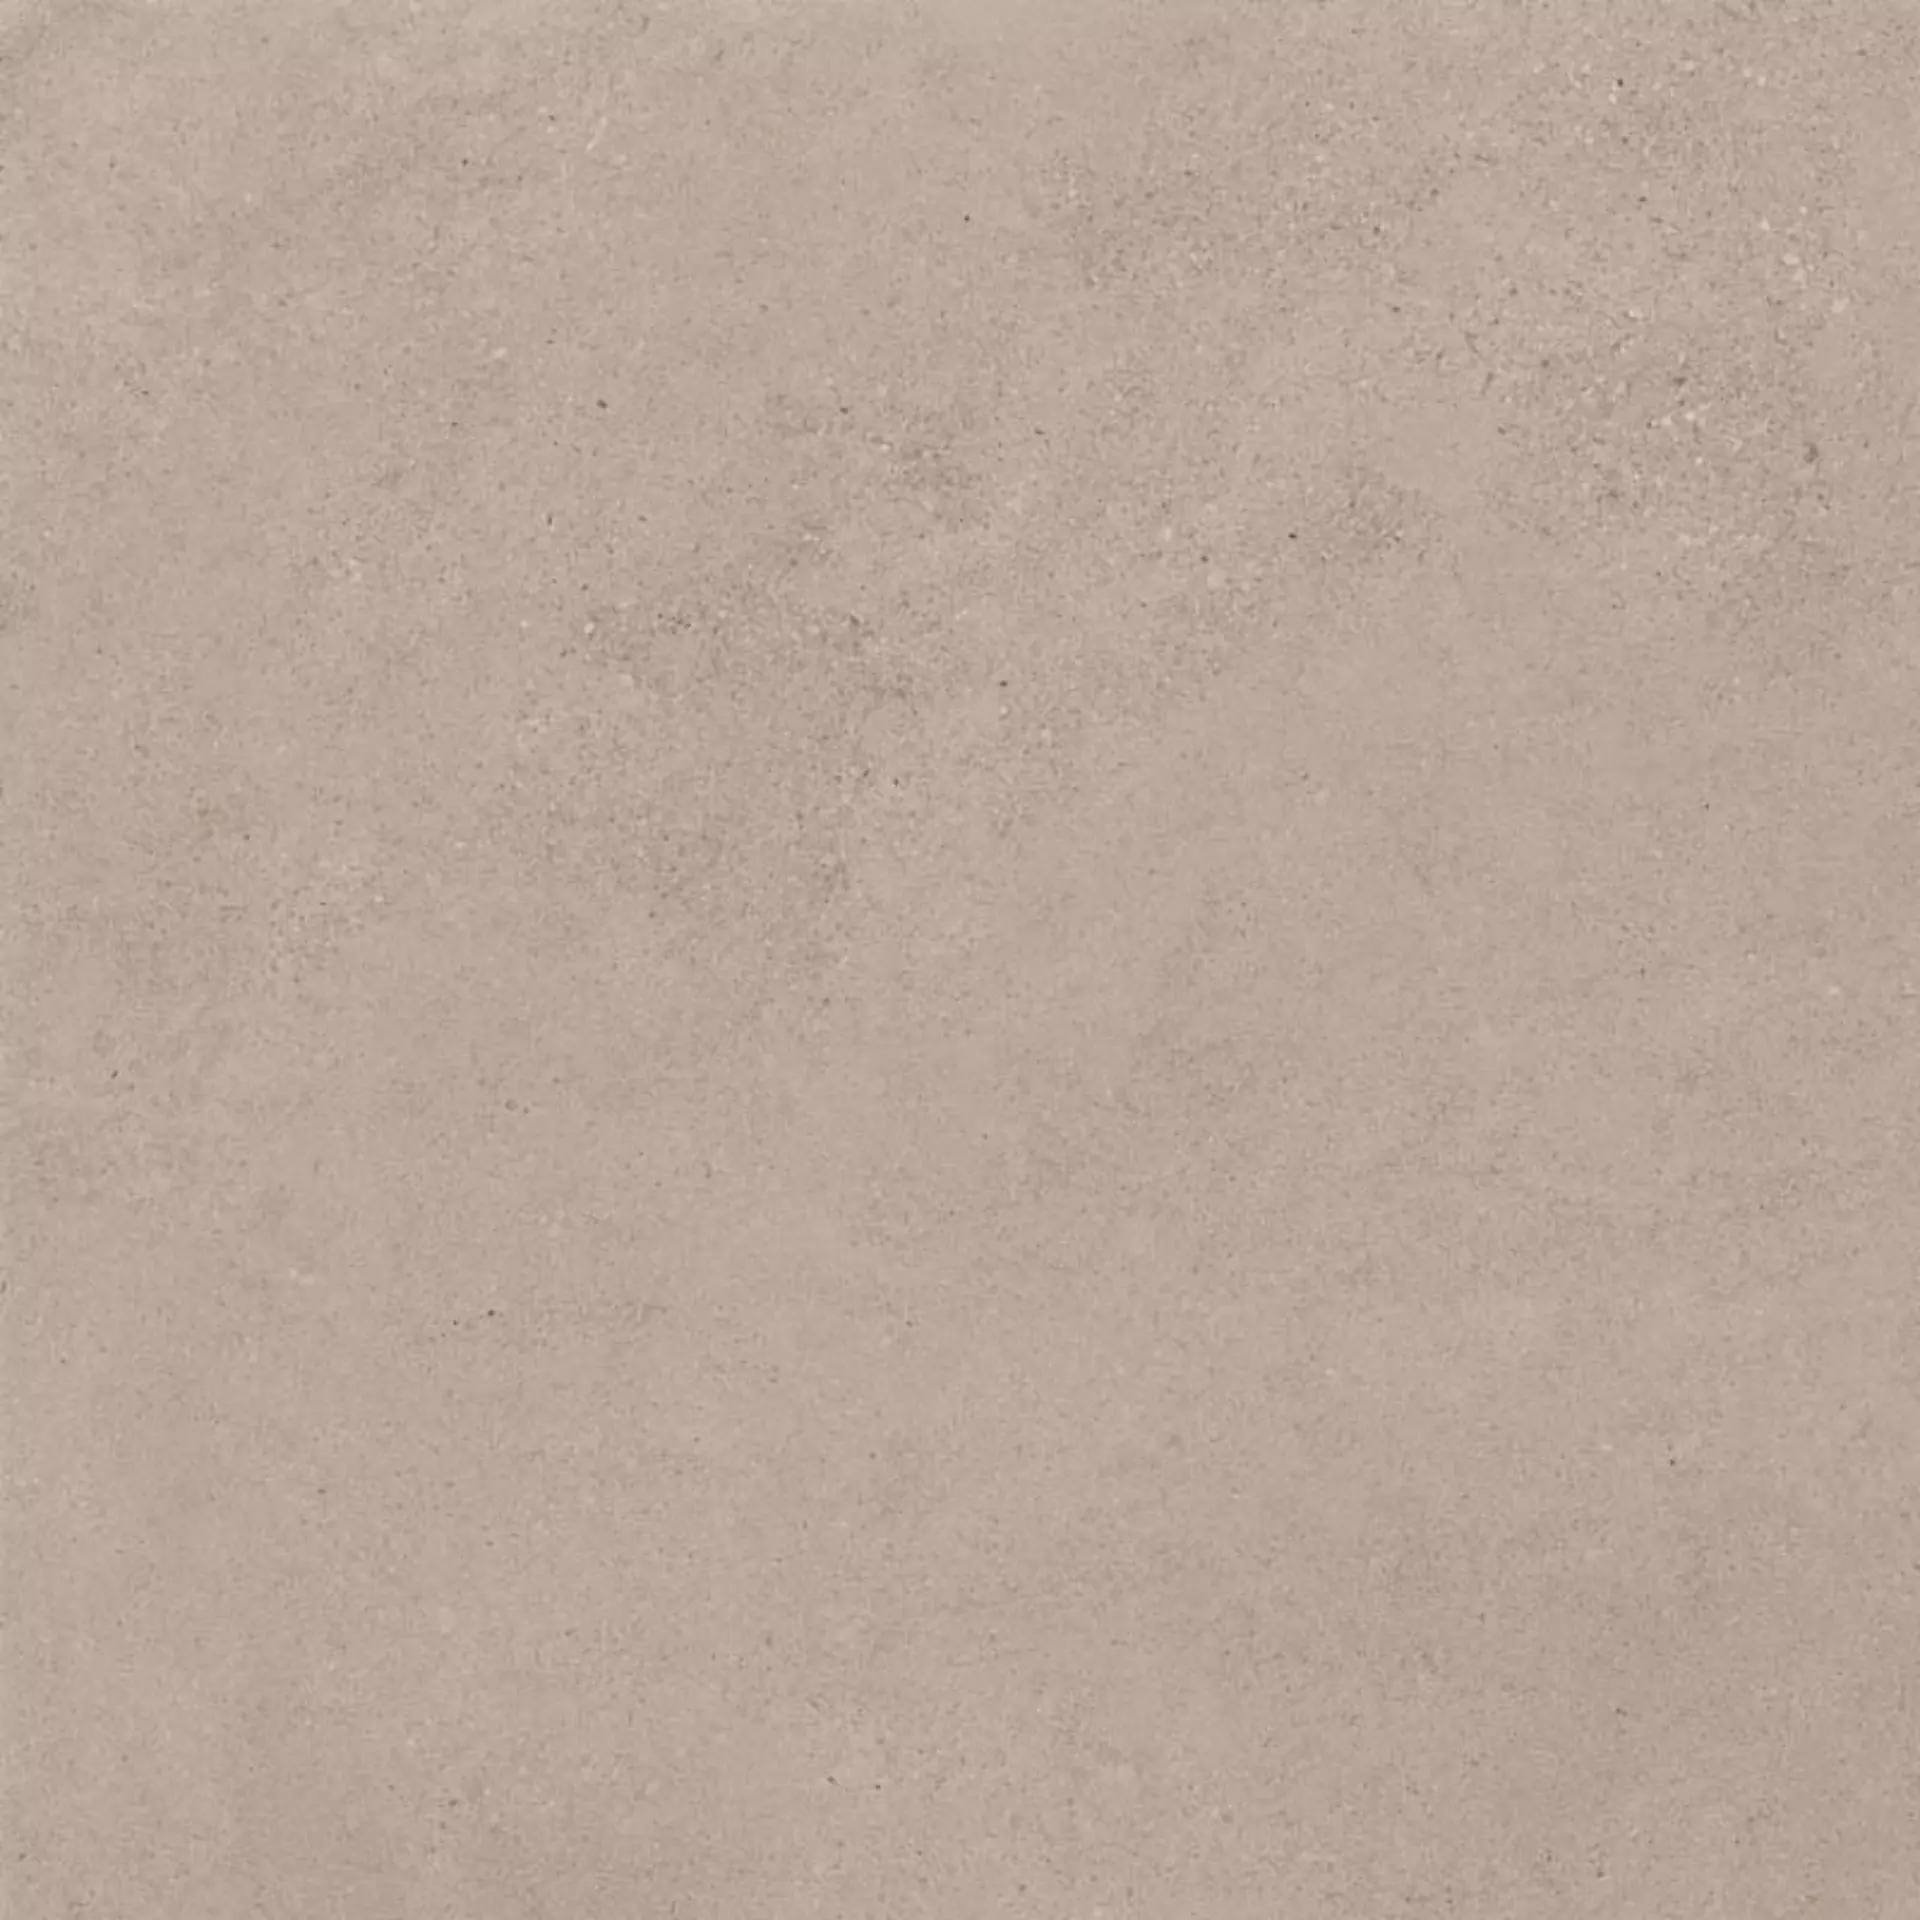 Sant Agostino Silkystone Taupe Natural CSASKSTA60 60x60cm rectified 10mm